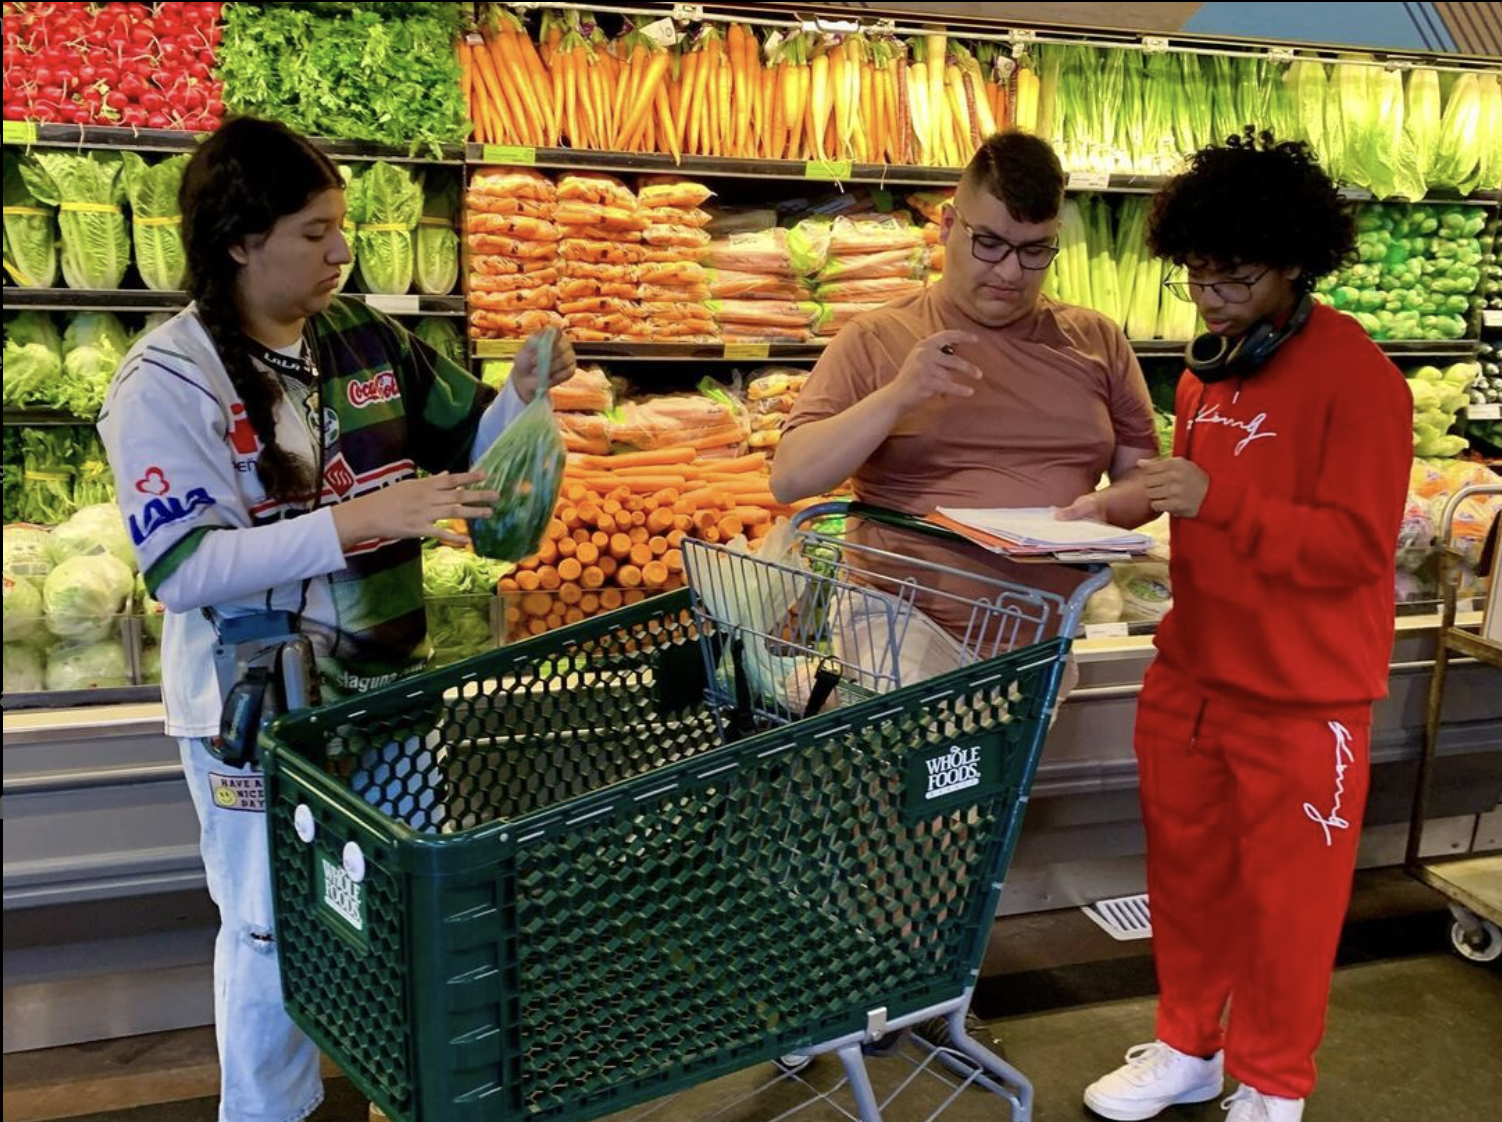 TSD Culinary Arts students in a grocery store